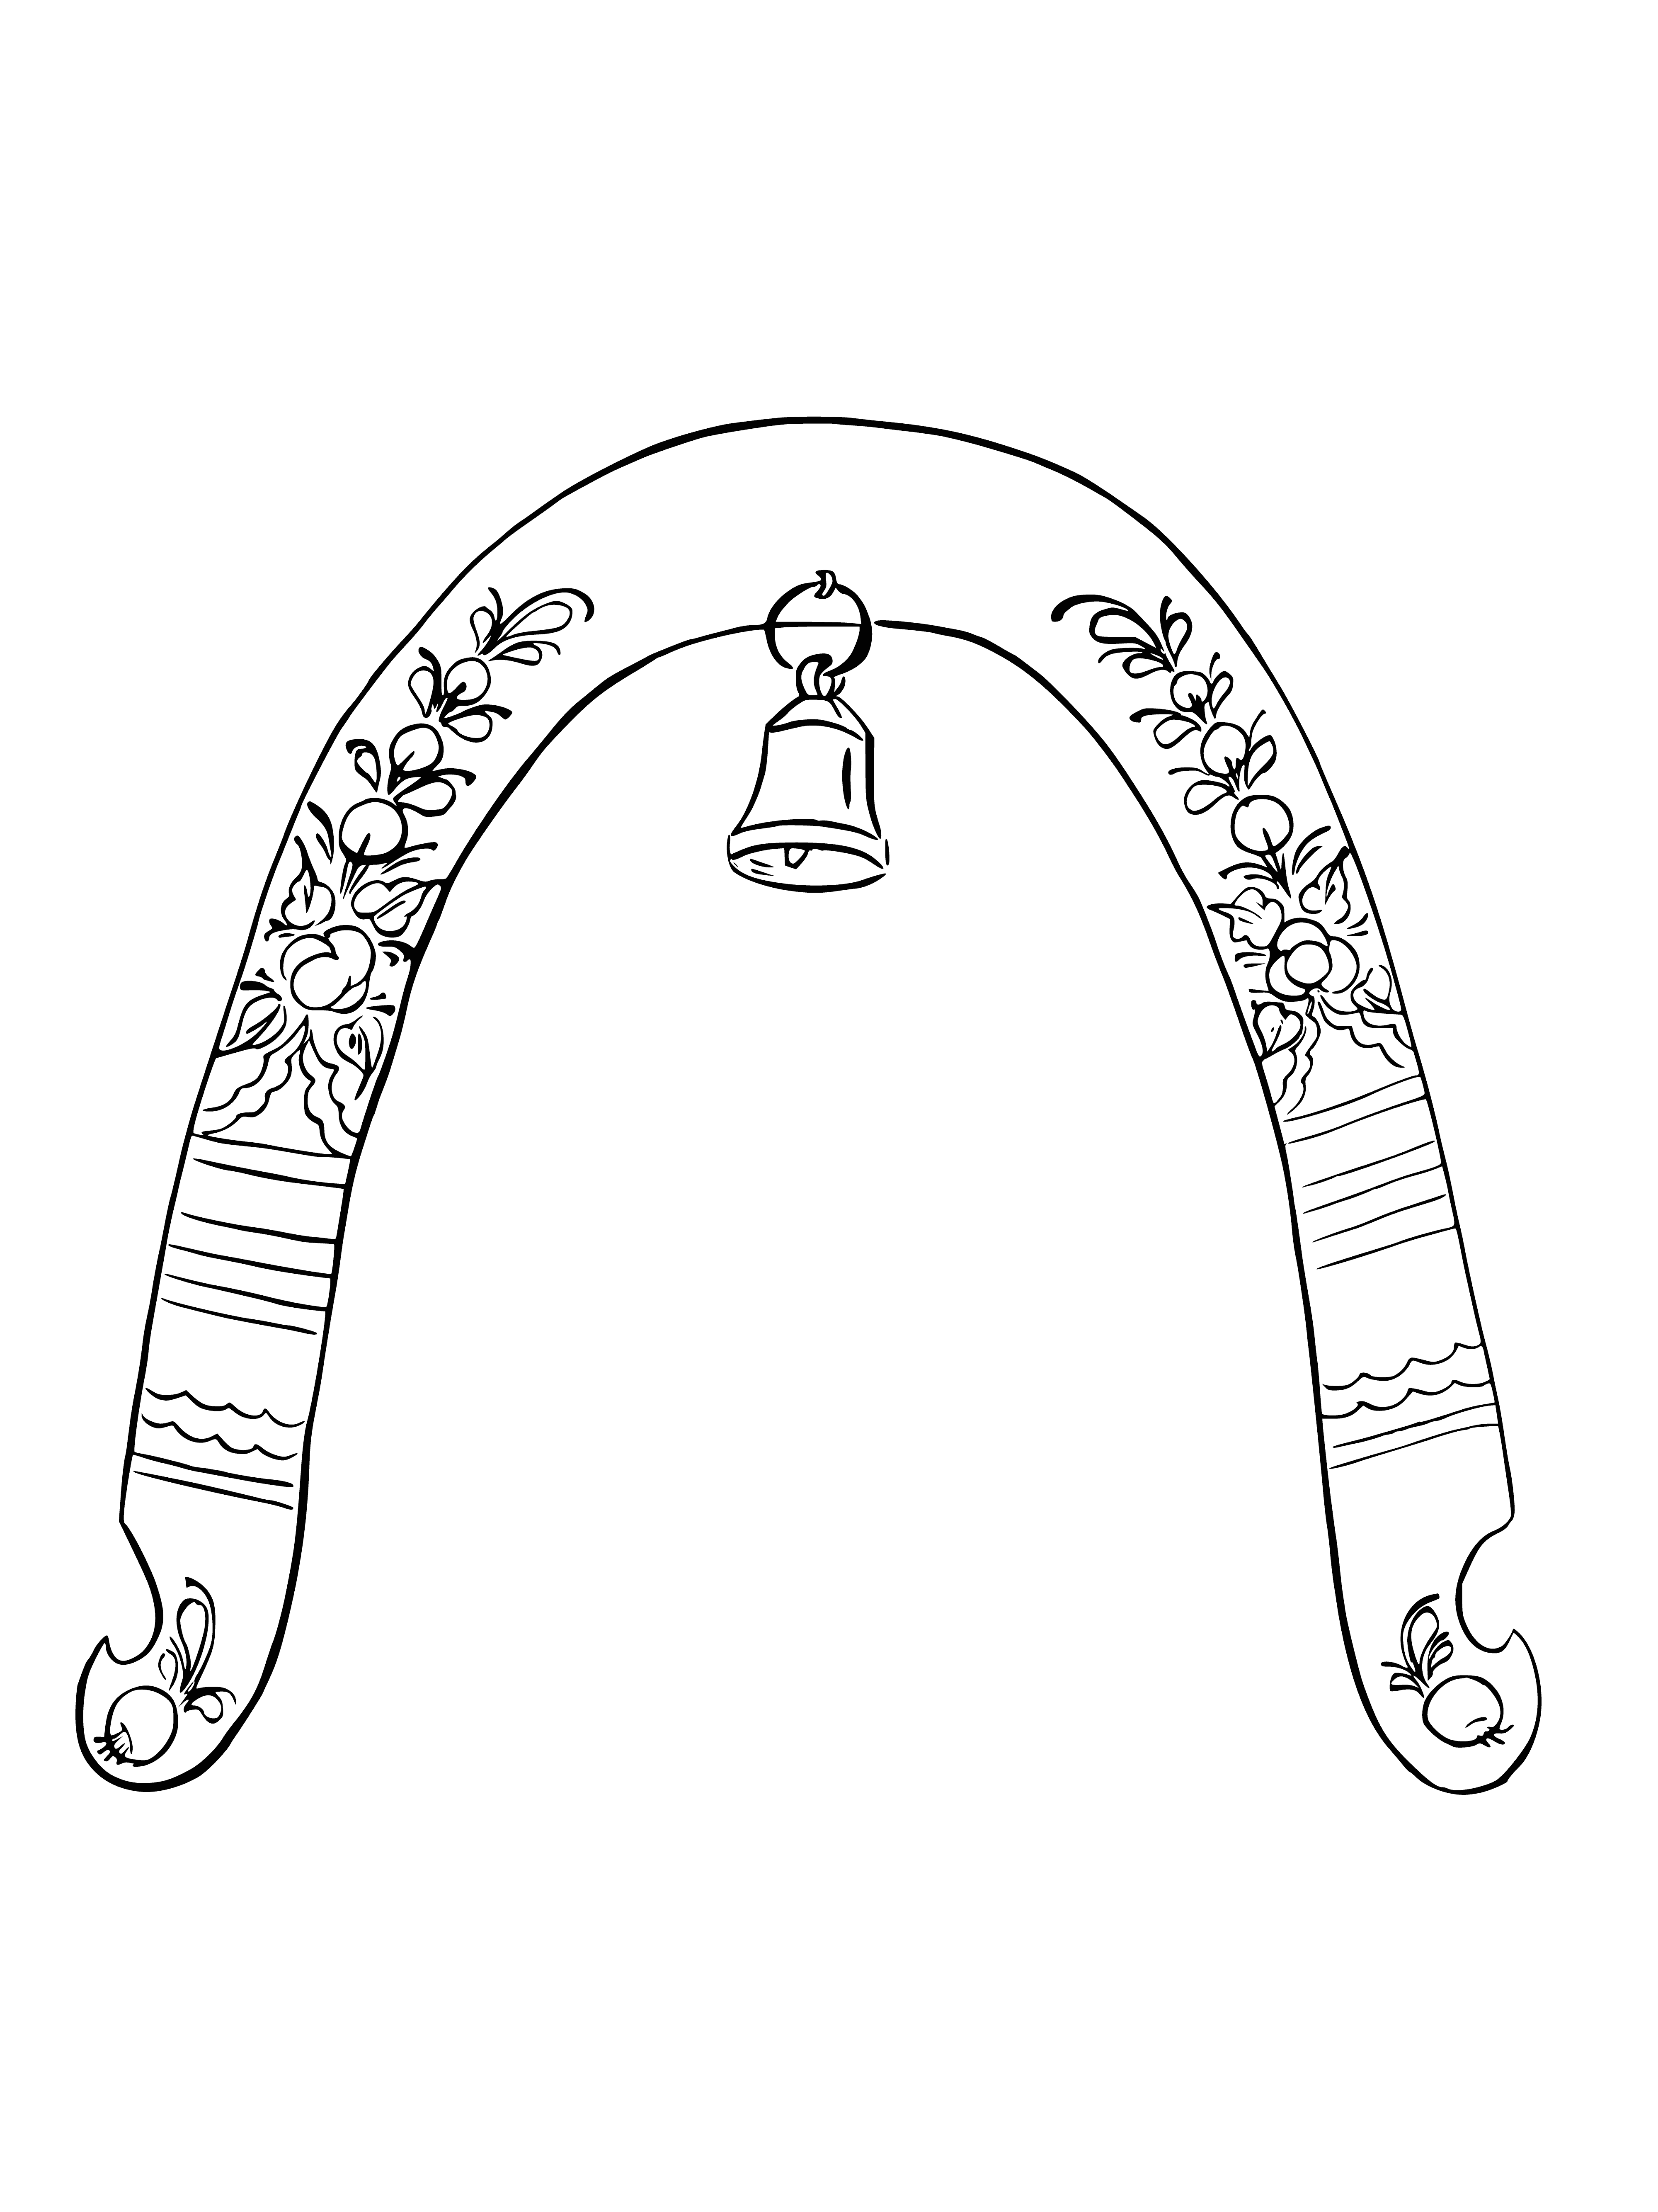 Harness coloring page